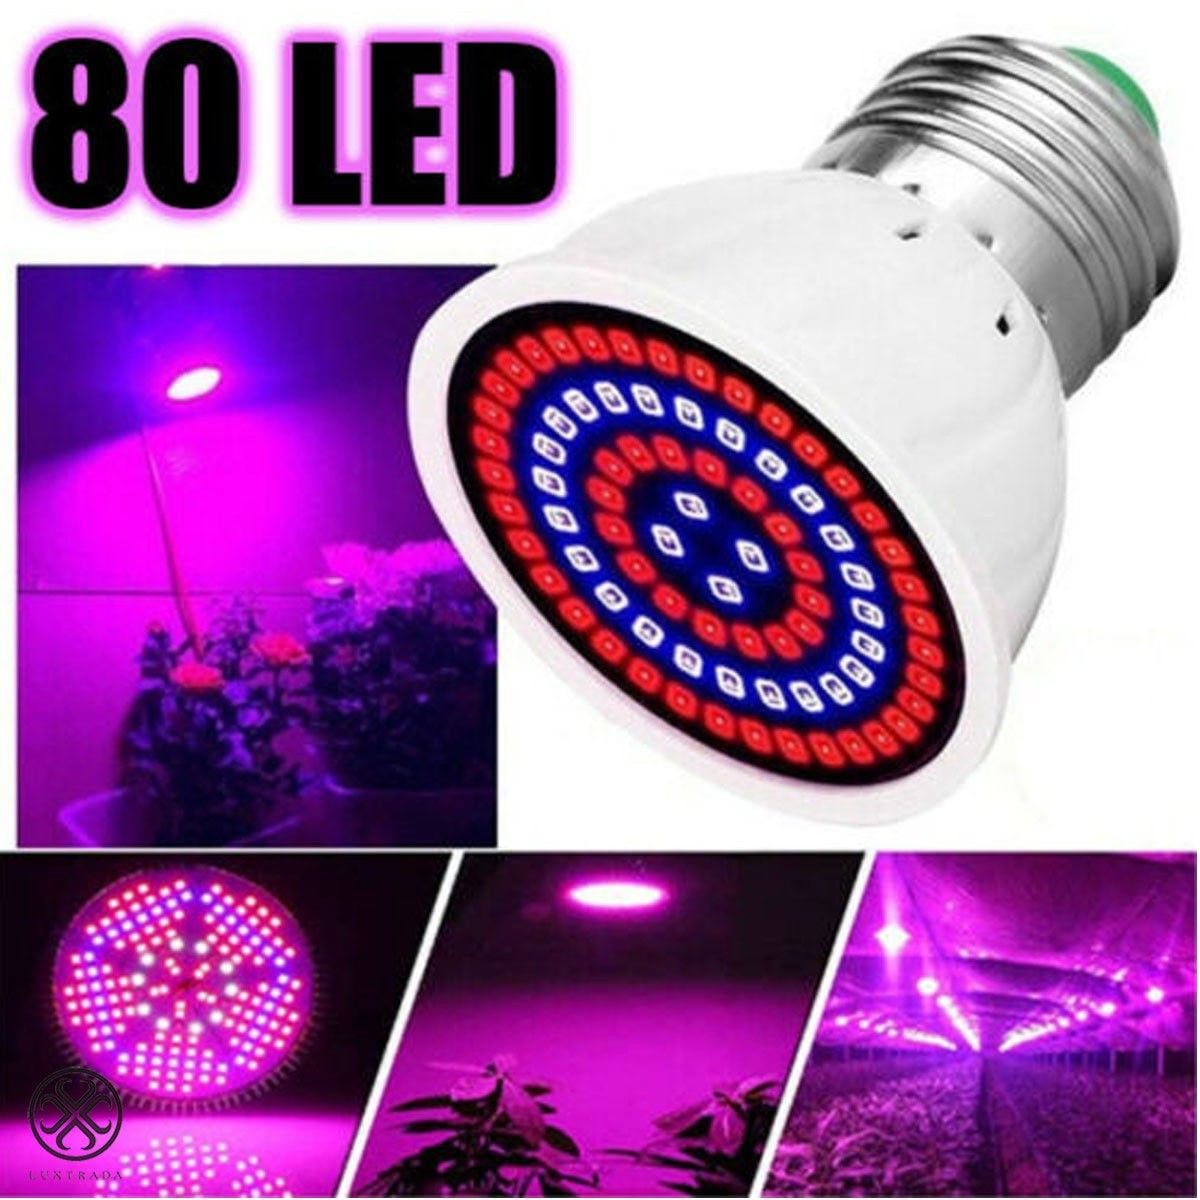 Details about   80 LED E27 Grow Light Bulb Indoor Plants Growing Lights Full Spectrum Lamp USA 